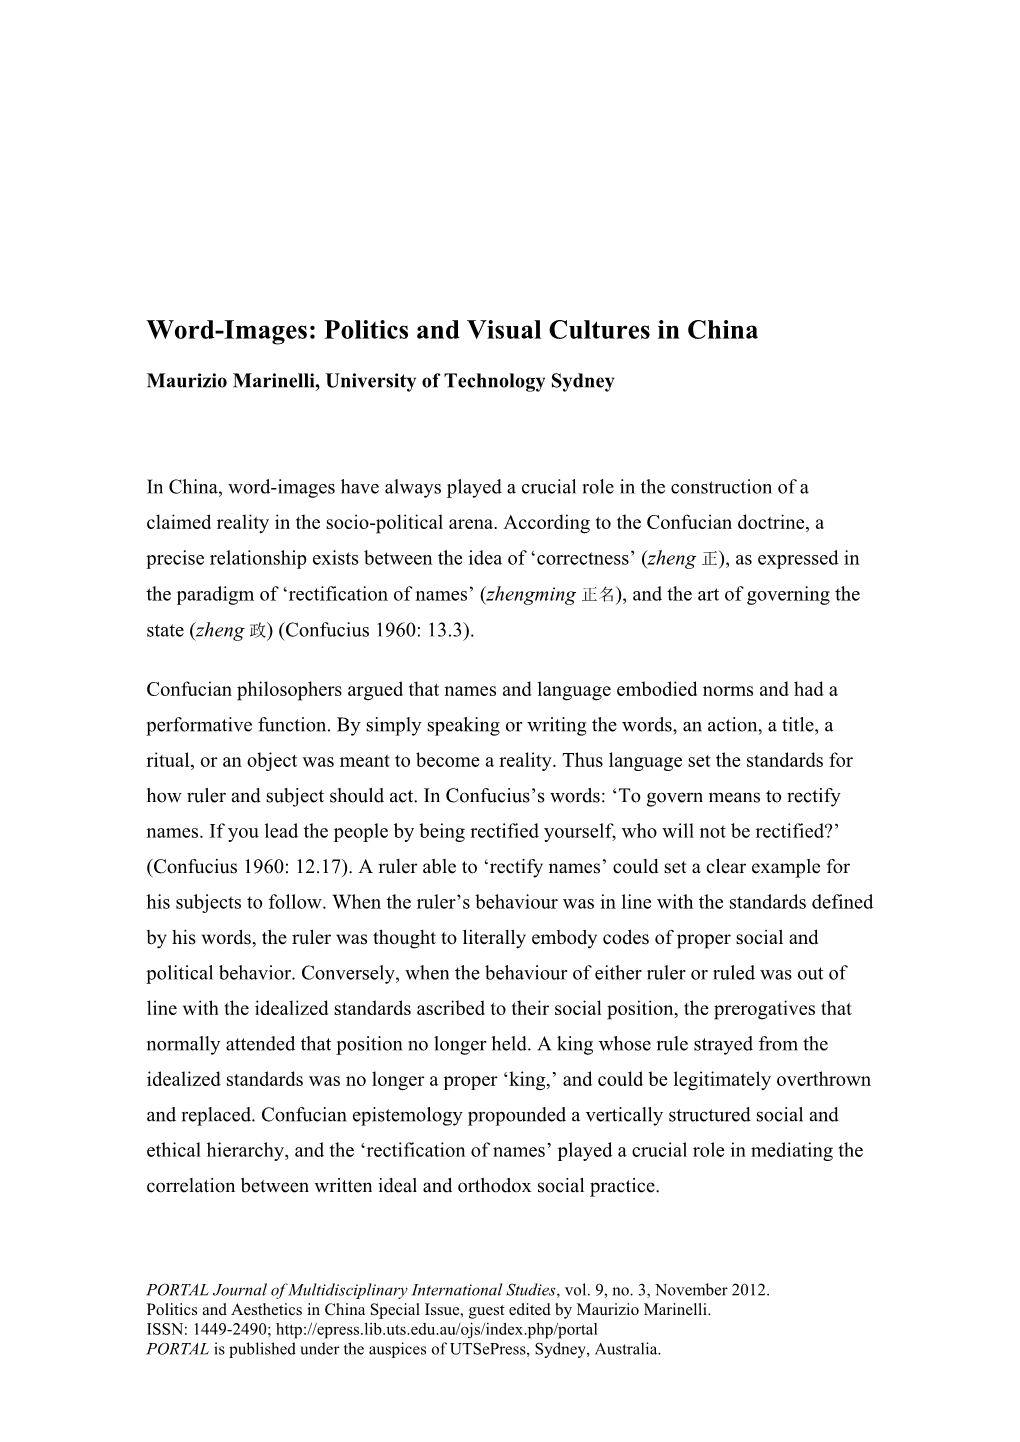 Politics and Visual Cultures in China